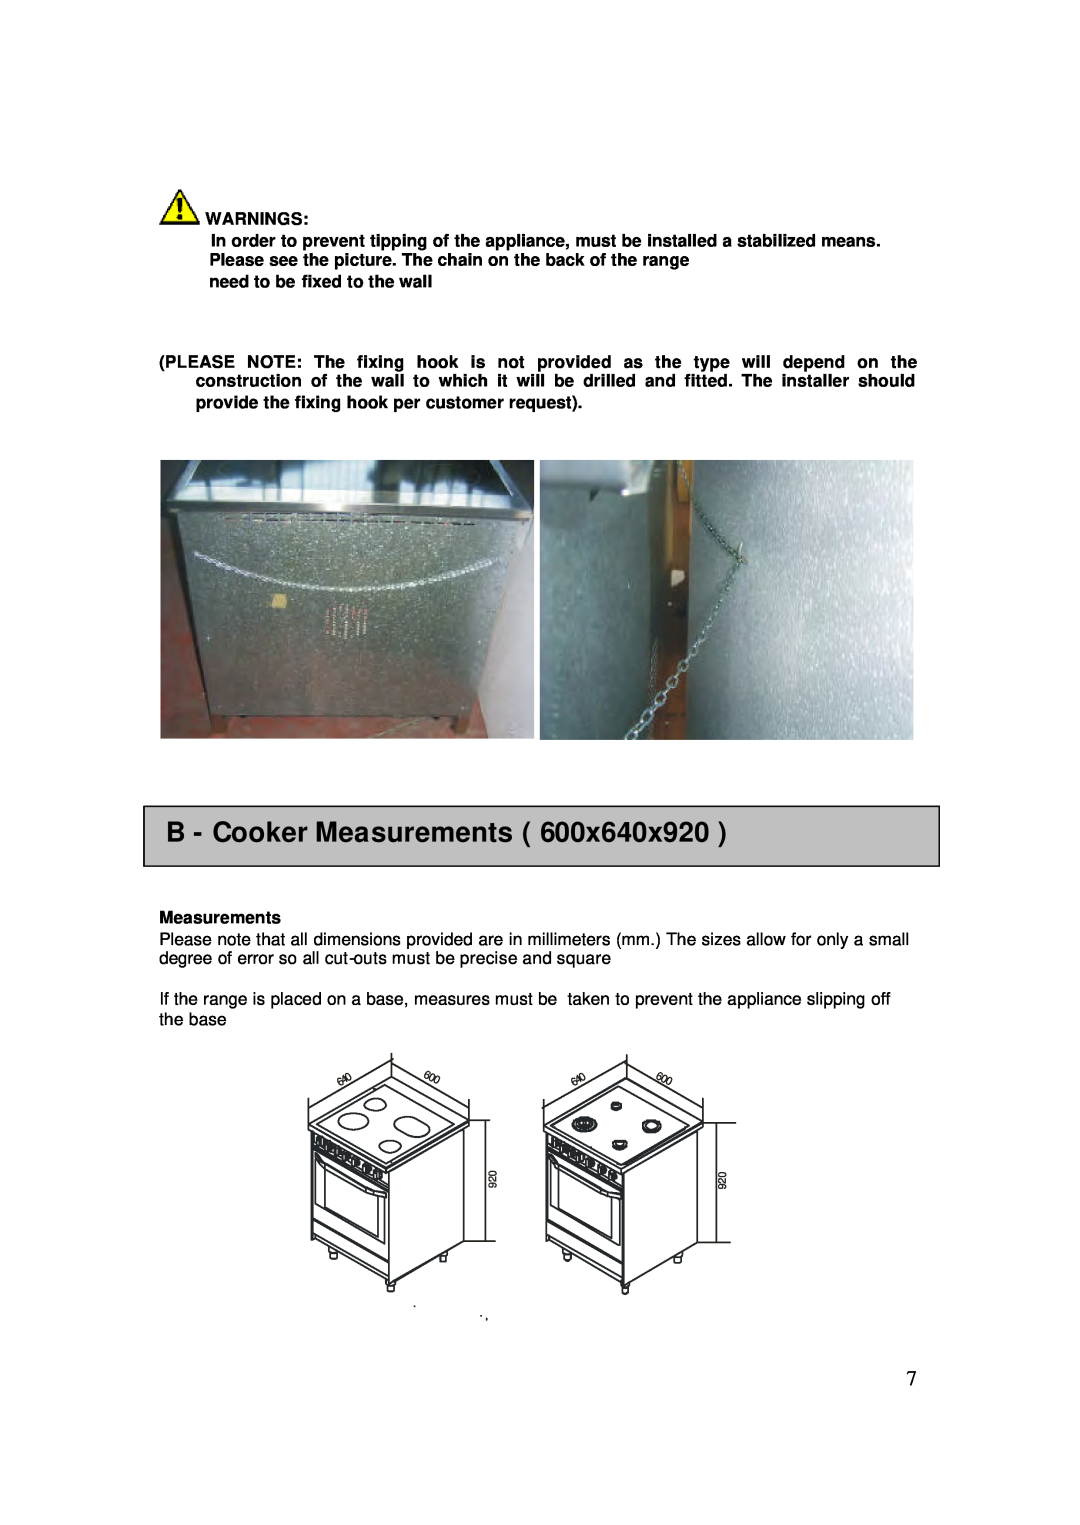 AEG 4006G-M user manual B - Cooker Measurements, Warnings, need to be fixed to the wall 